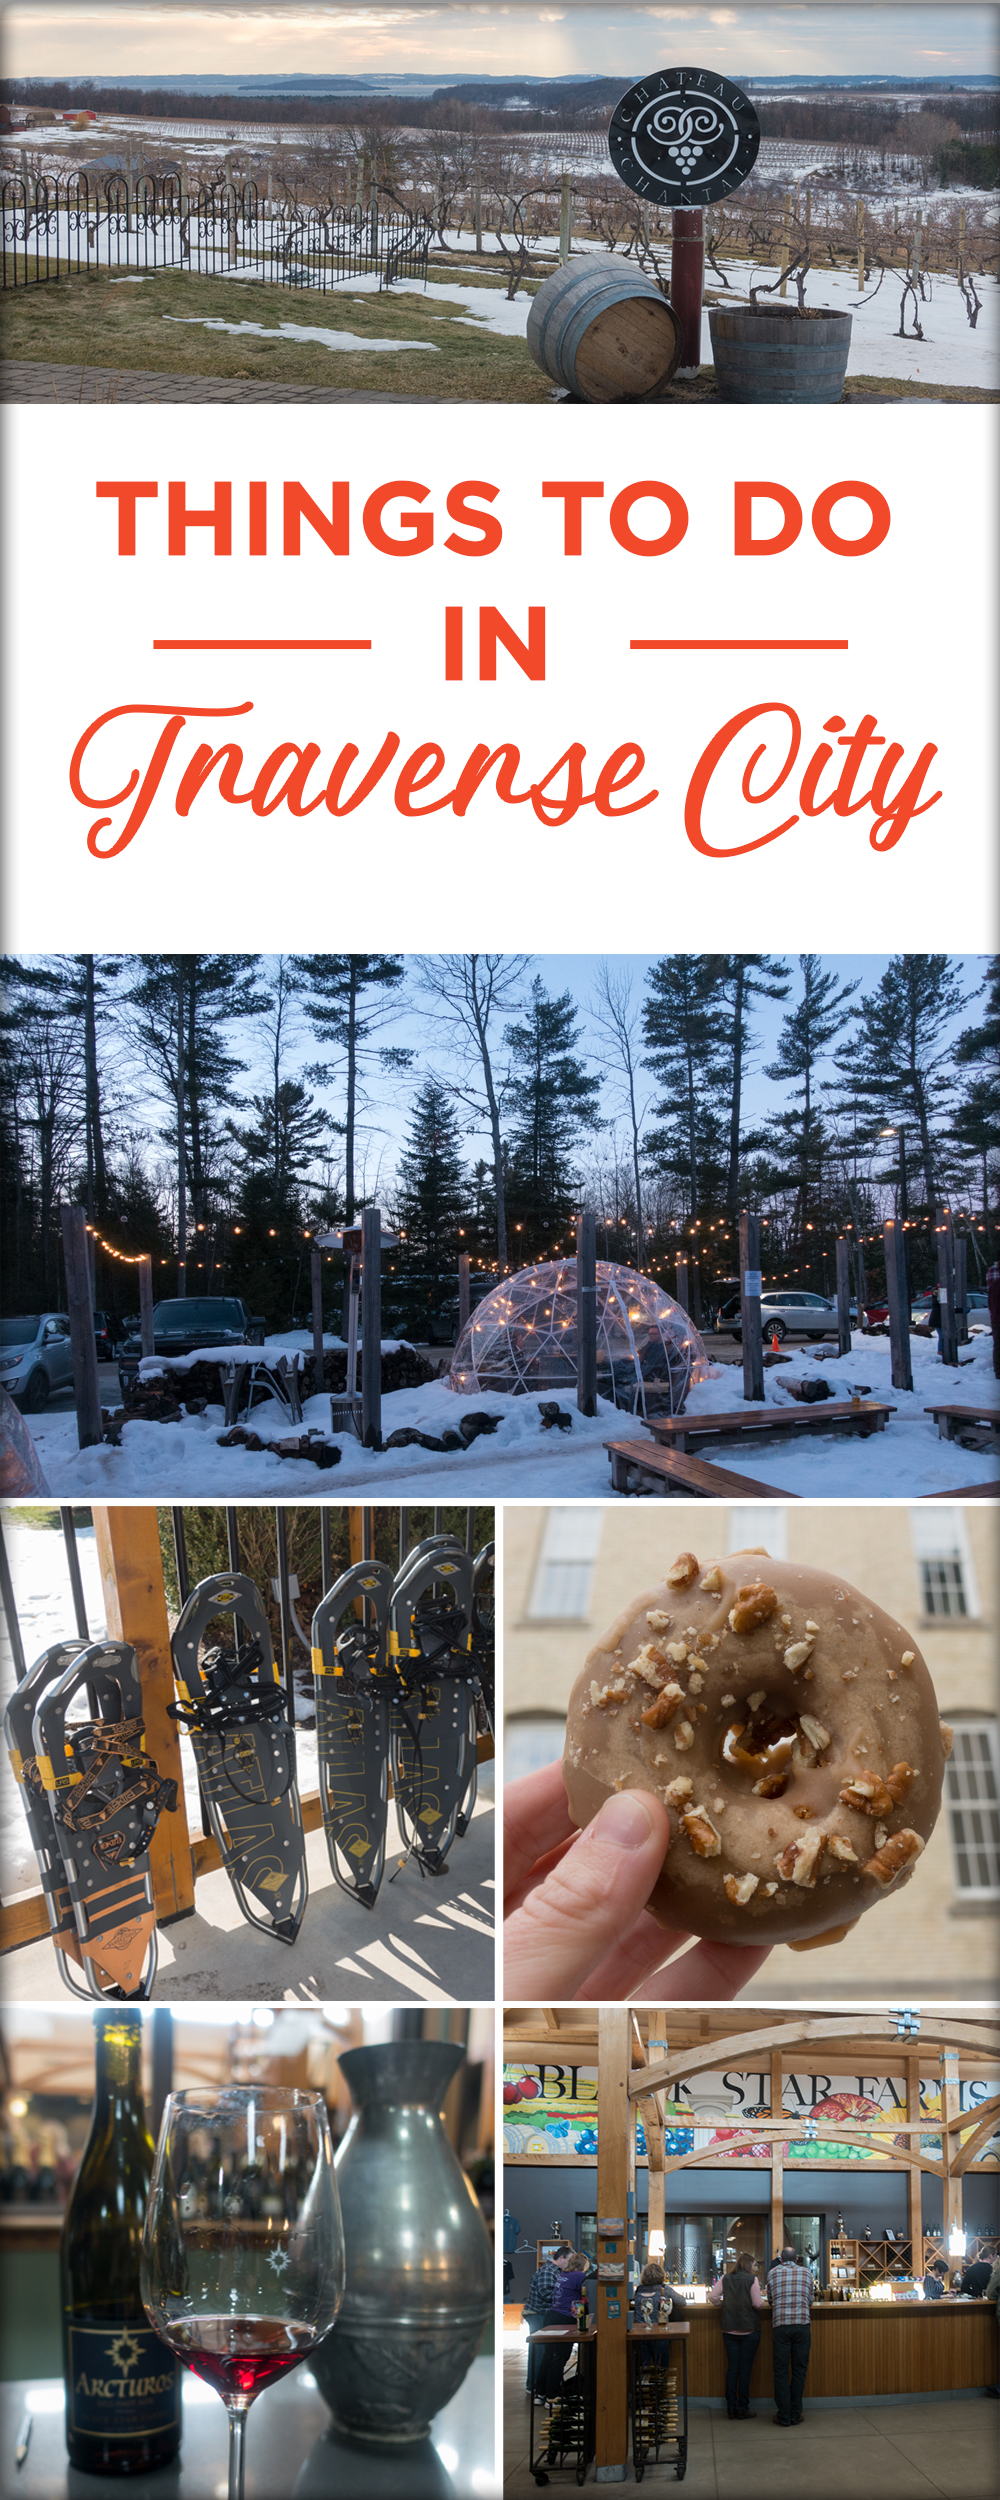 Traverse City Getaway: The ultimate guide on what to see and do during your visit! #TraverseCity #Michigan 